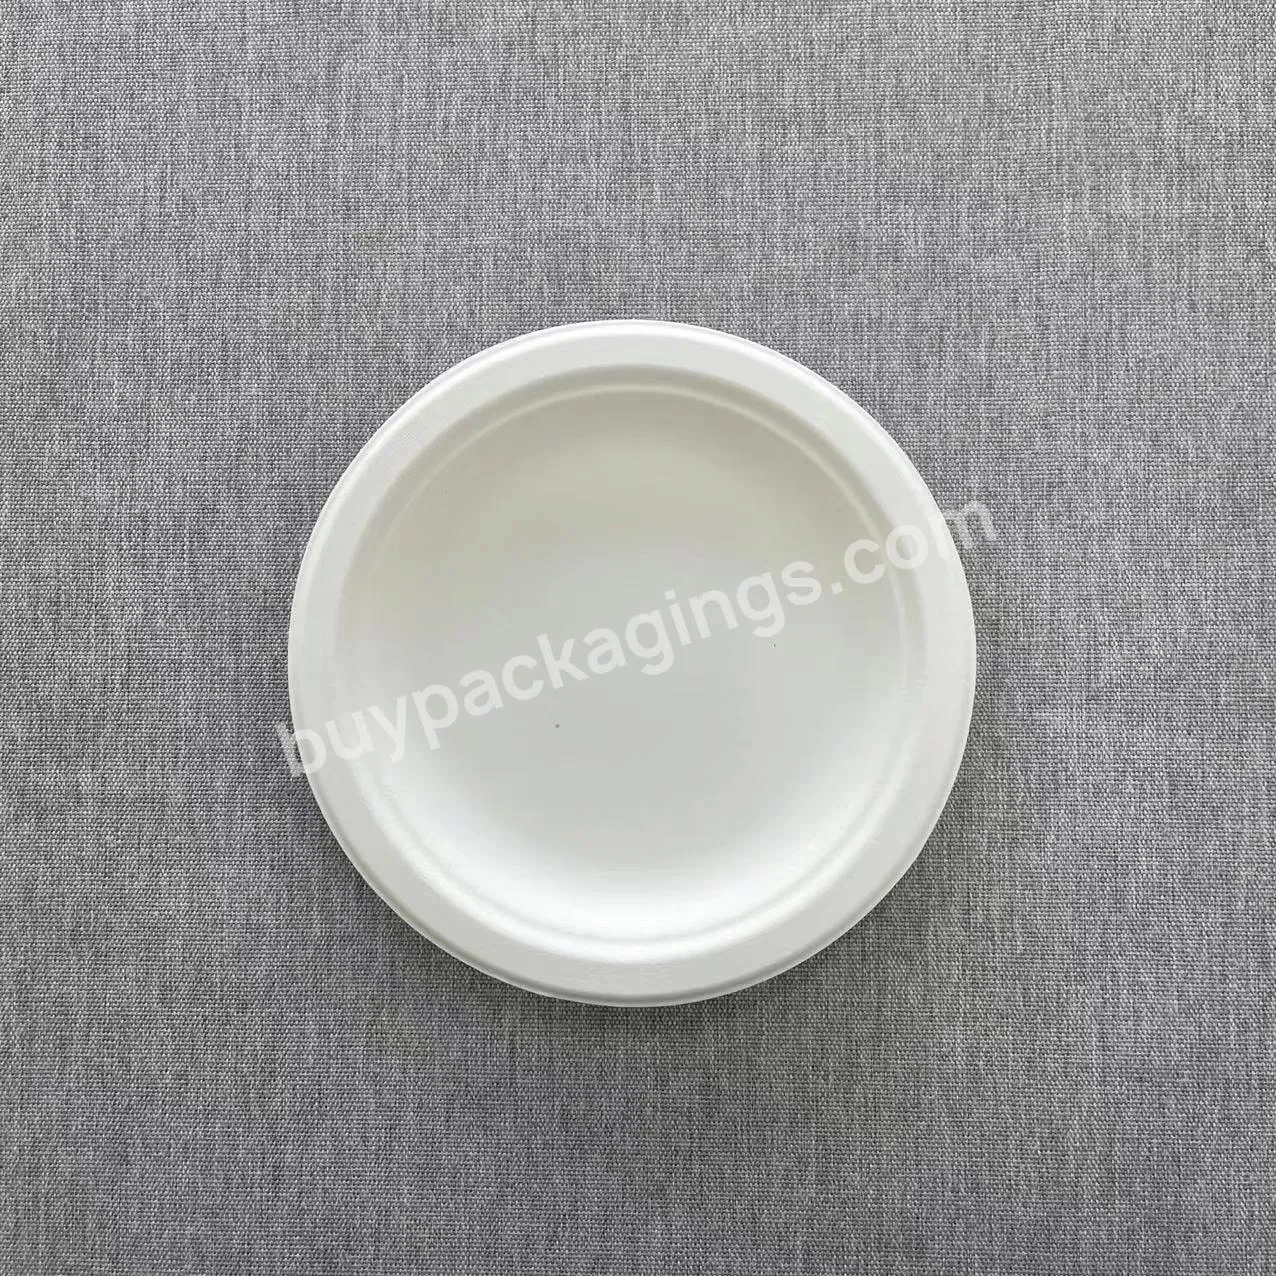 In Stock Biodegradable Compostable Disposable Heavy Duty Sugarcane Classic Paper Pulp 9 Inch Molded Pulp Plate - Buy Biodegradable Paper Pulp Plates 9 Inch,Compostable Paper Plates In Stock,Sugarcane Paper Pulp Plates.